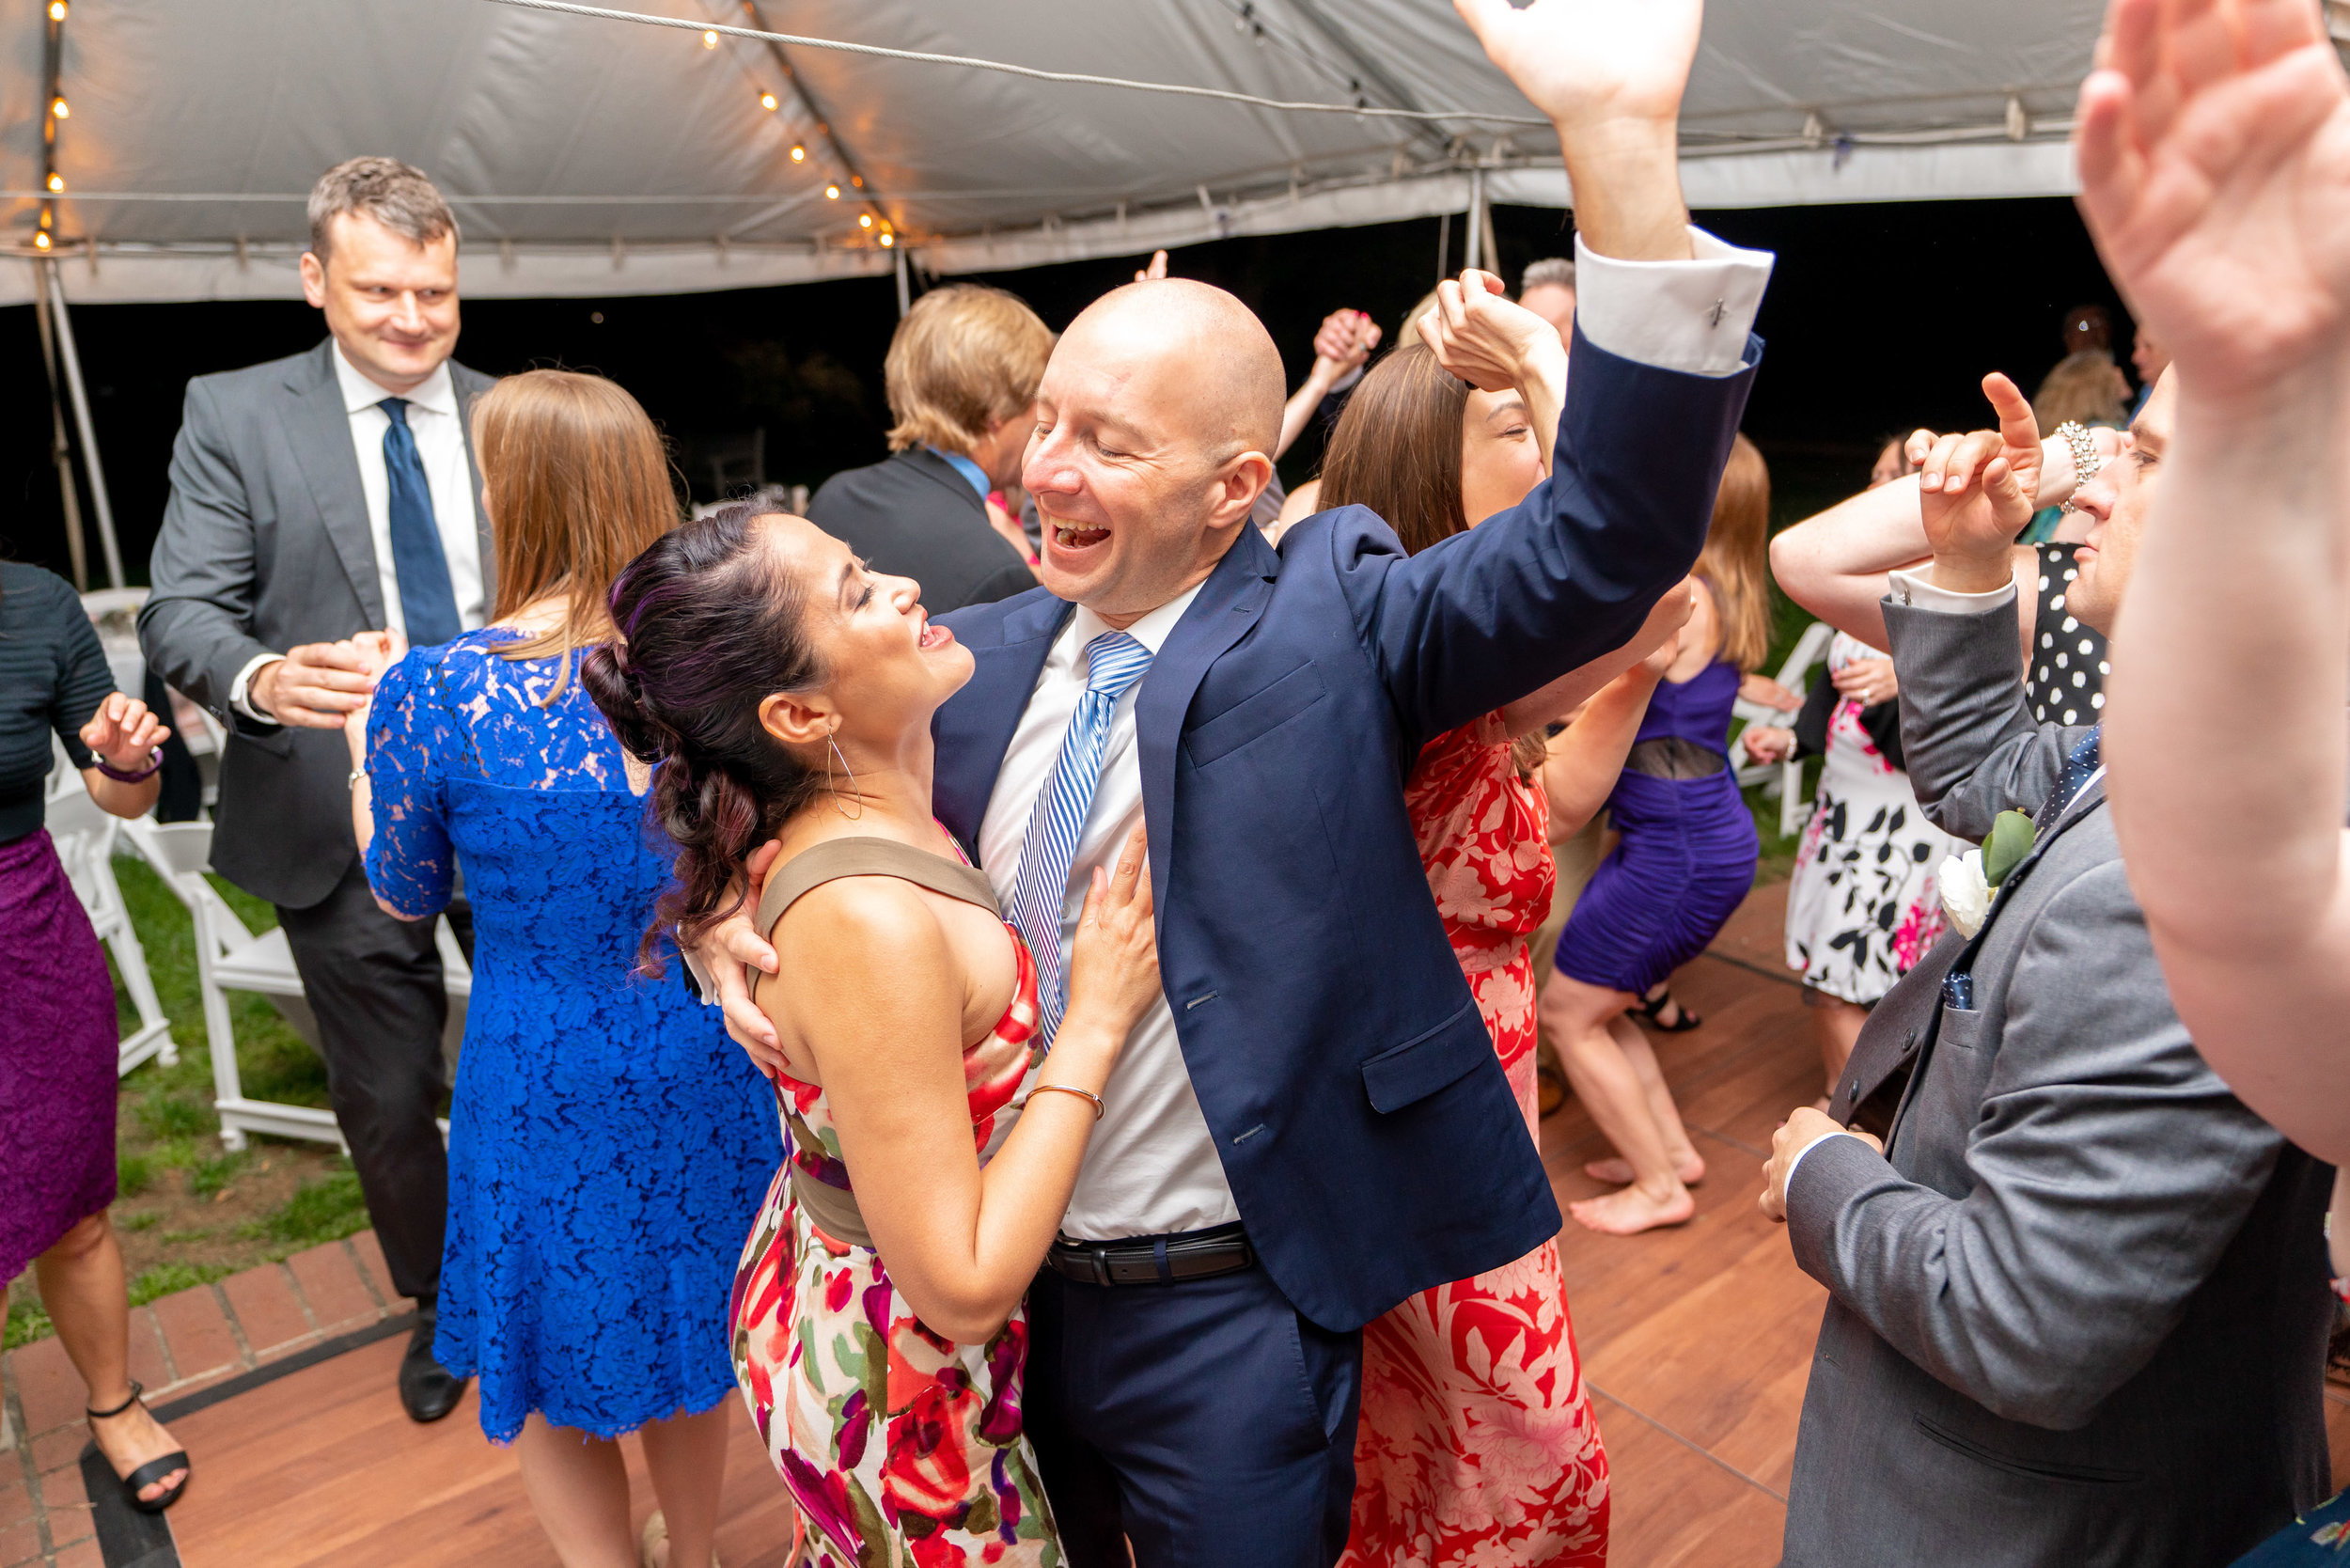 Amazing guests photo having a great time on the dance floor at Hendry House wedding 